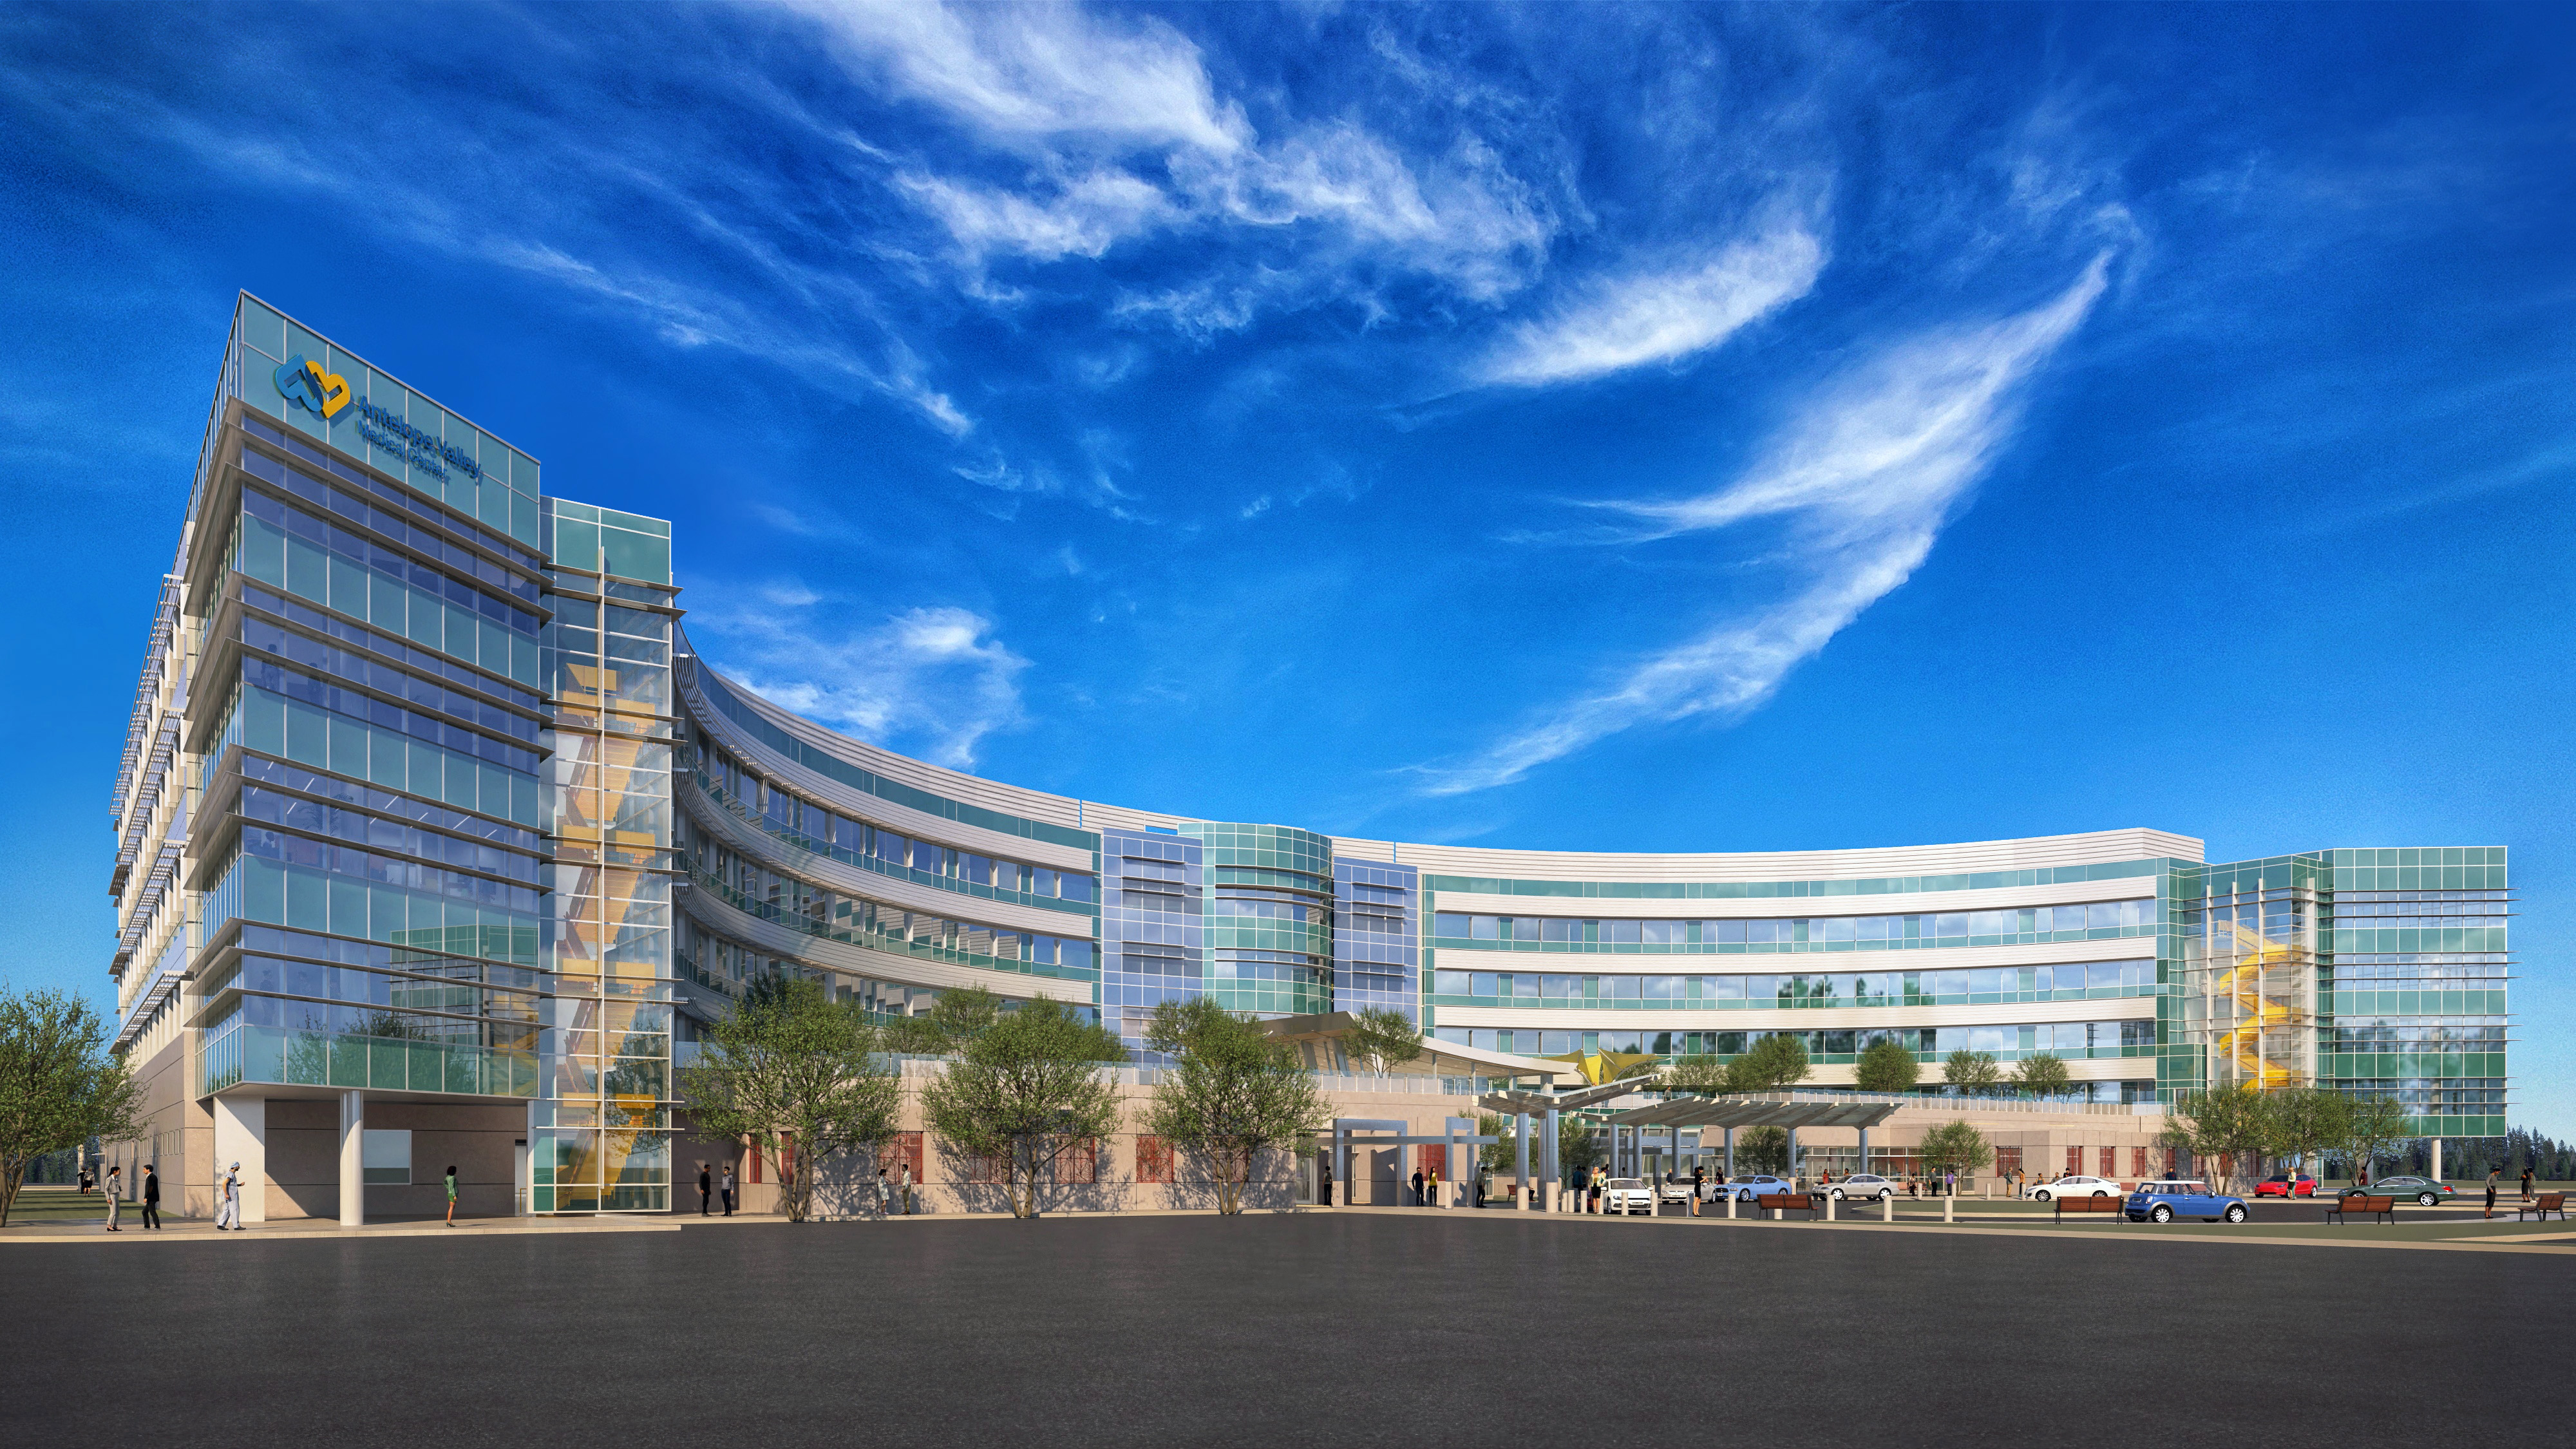 Antelope Valley Medical Center's proposed new hospital